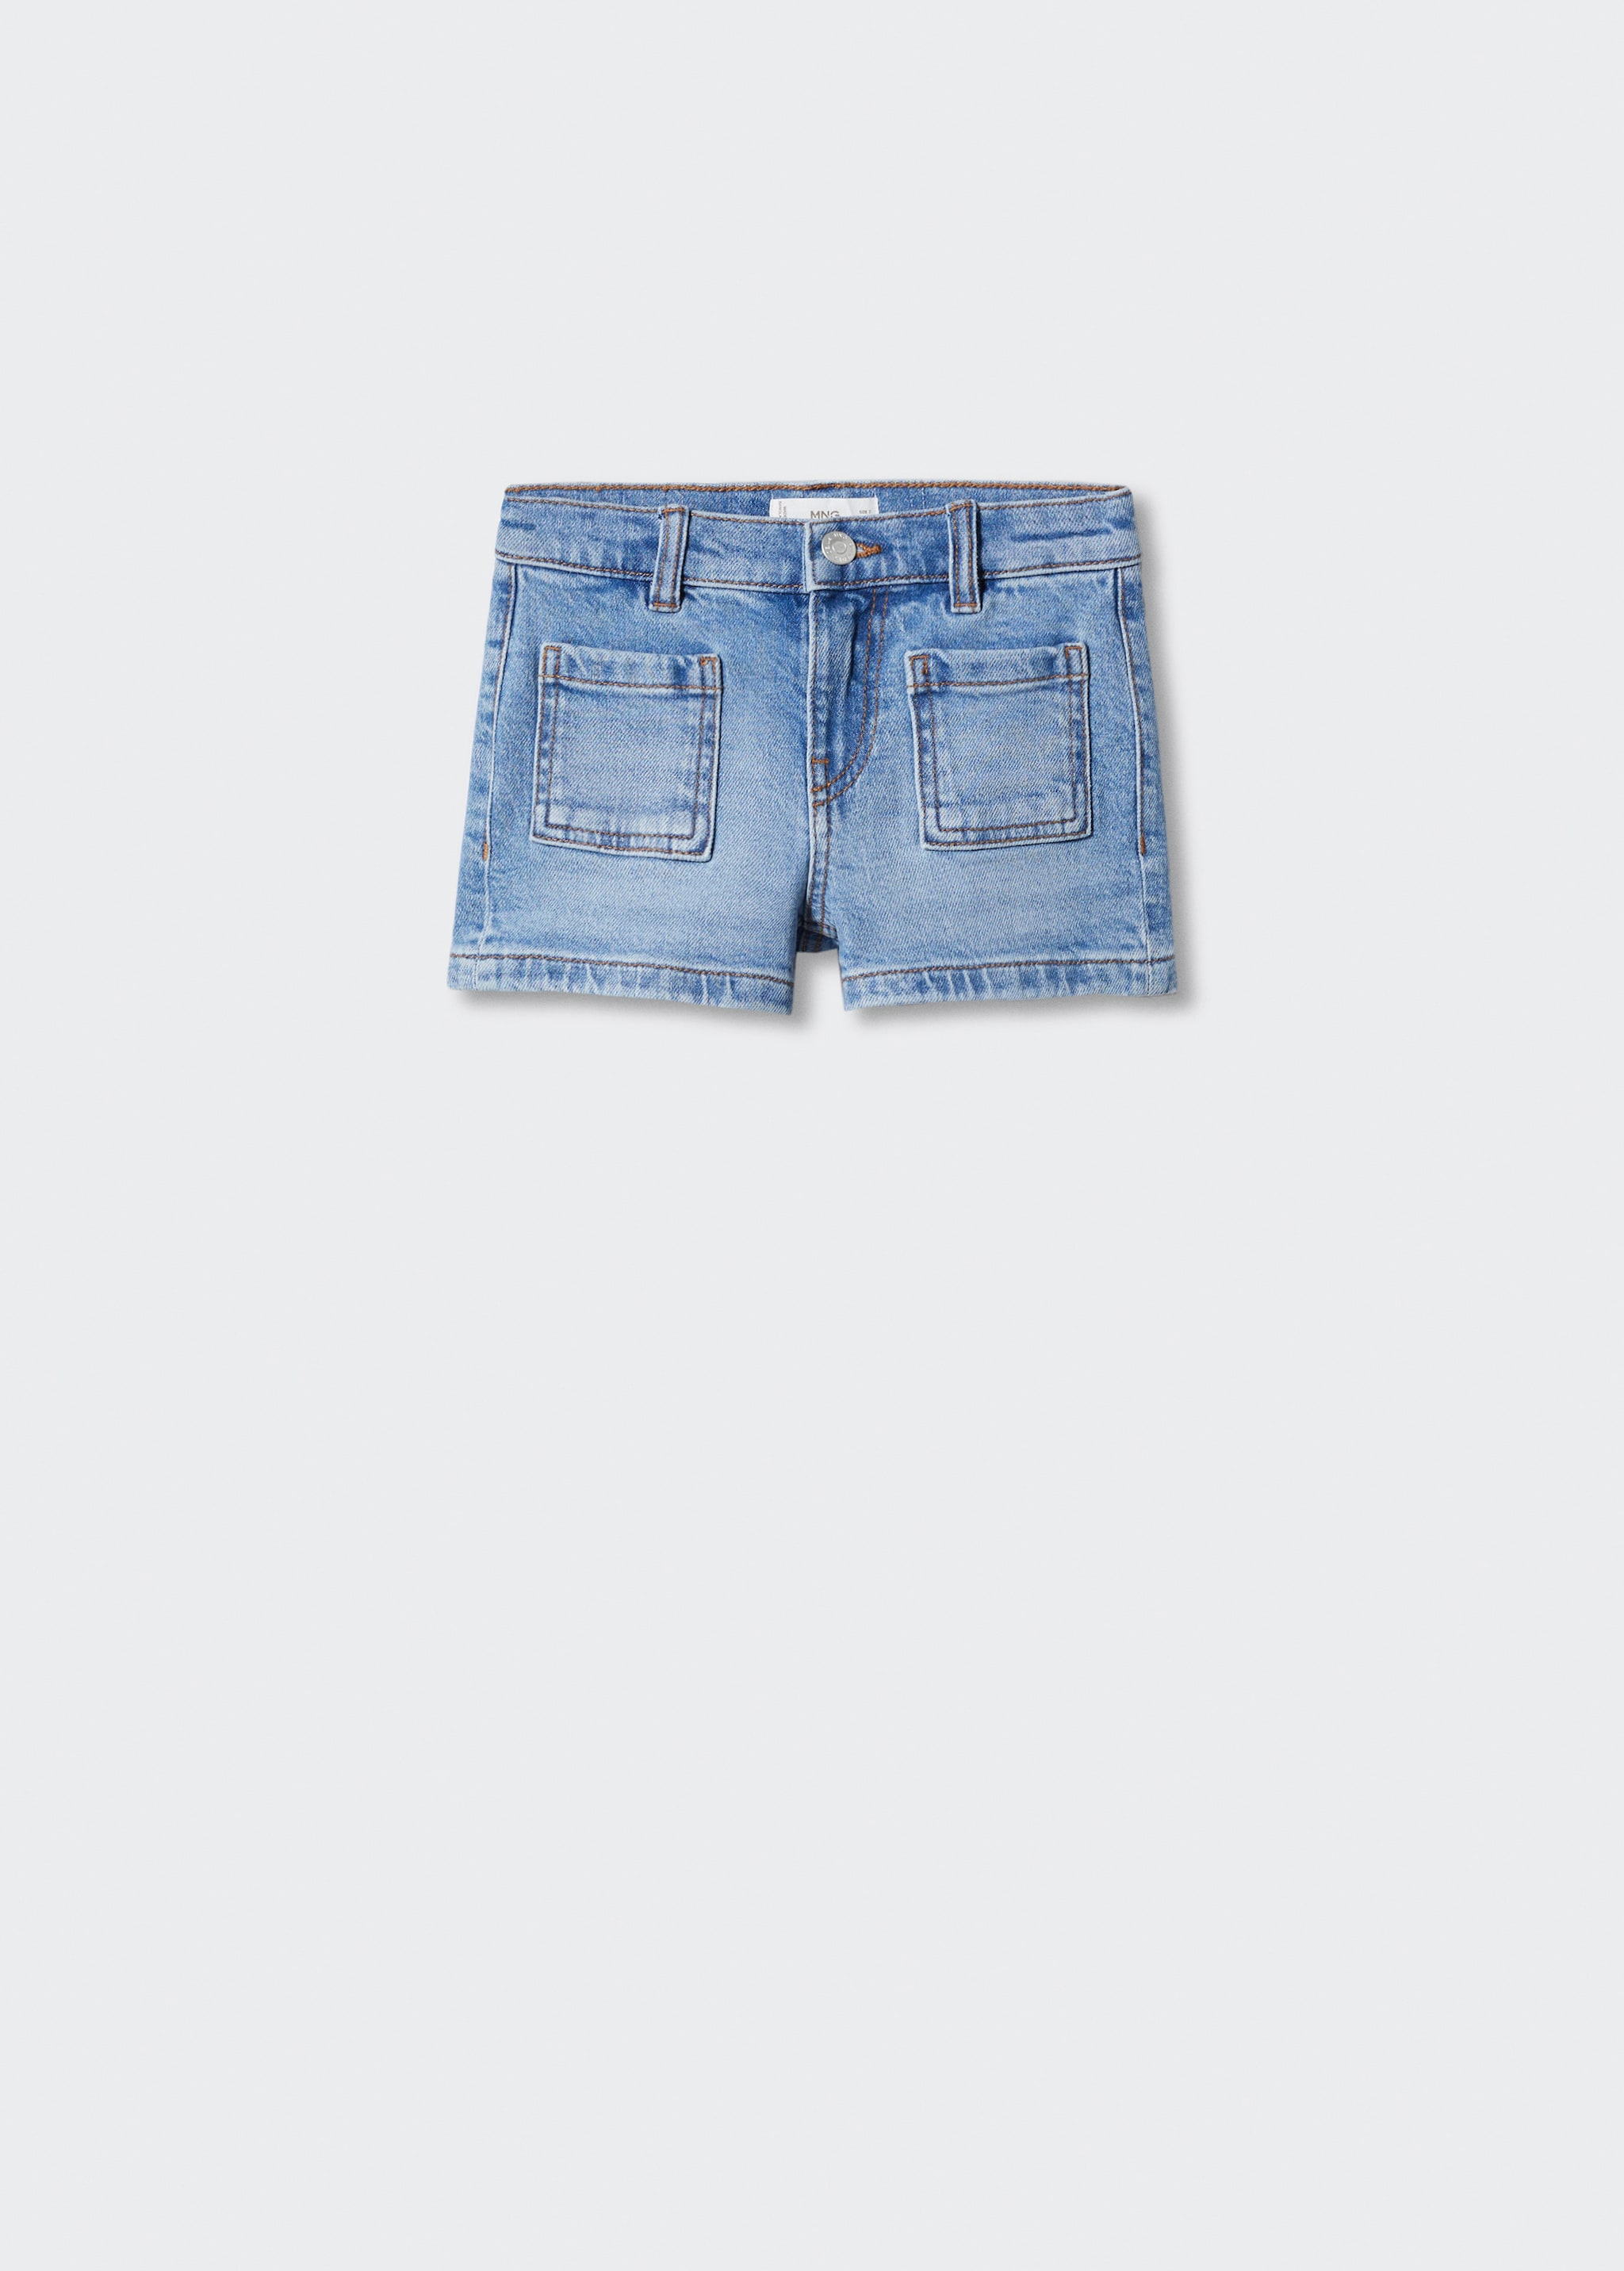 Denim shorts with pockets - Article without model